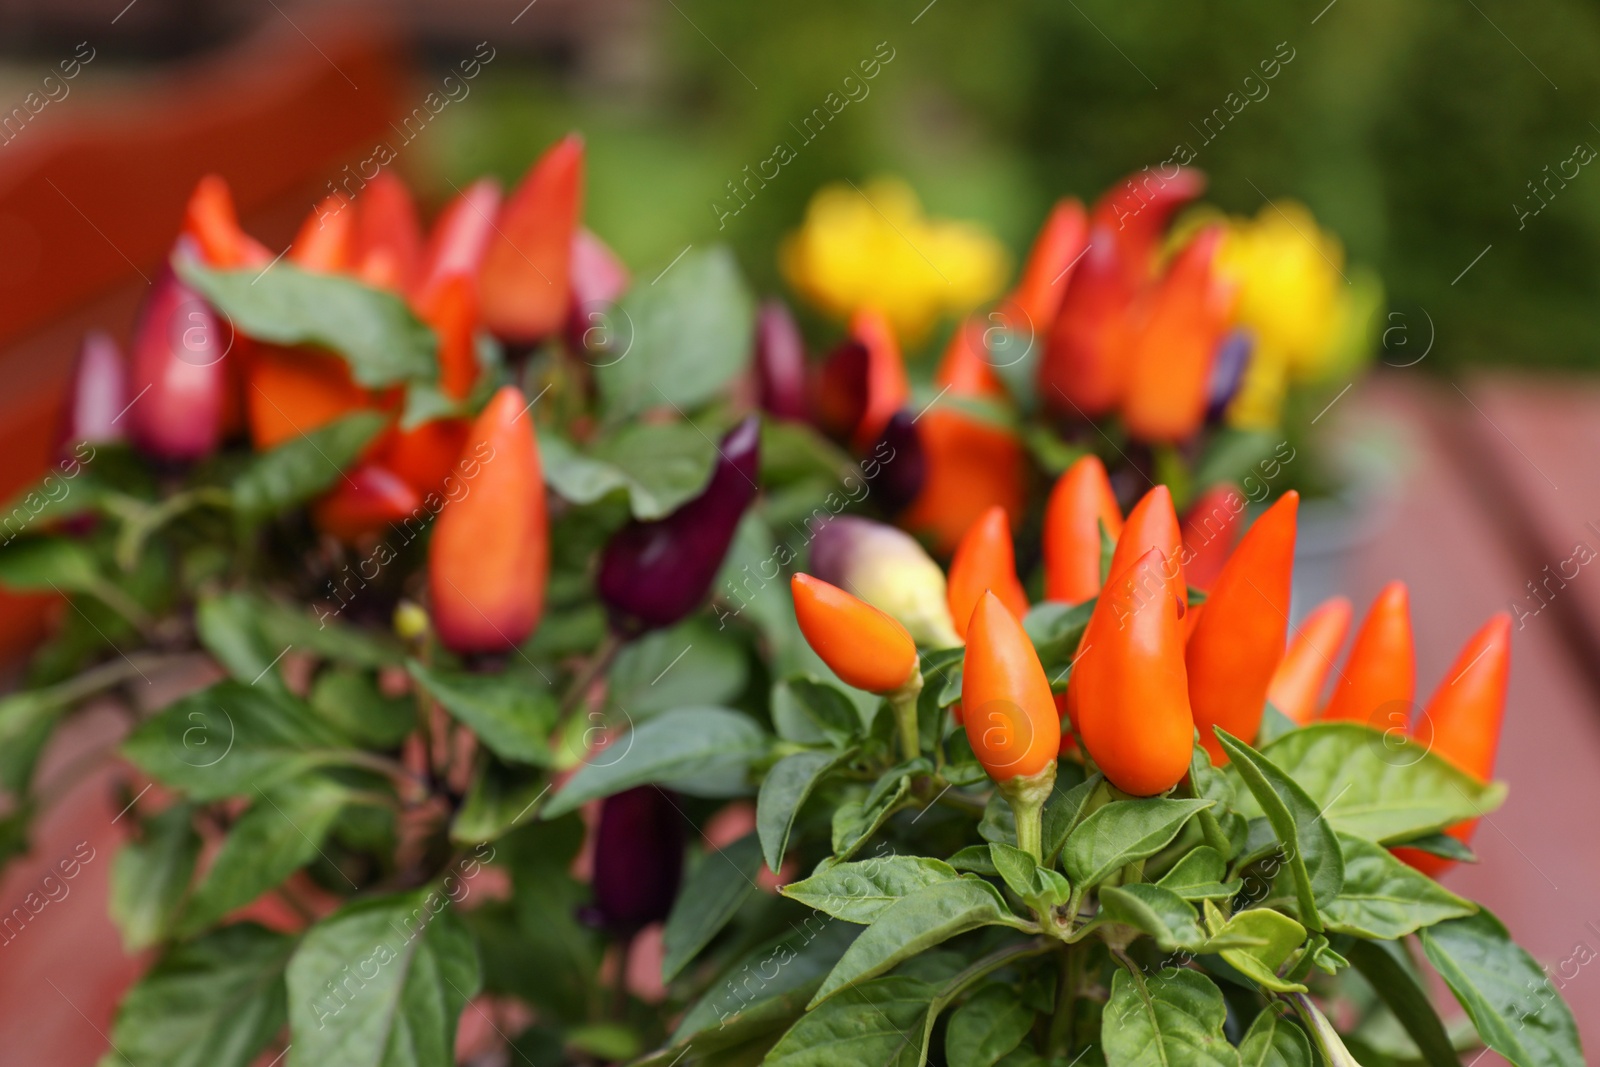 Photo of Capsicum Annuum plants. Potted rainbow multicolor chili peppers outdoors against blurred background, closeup